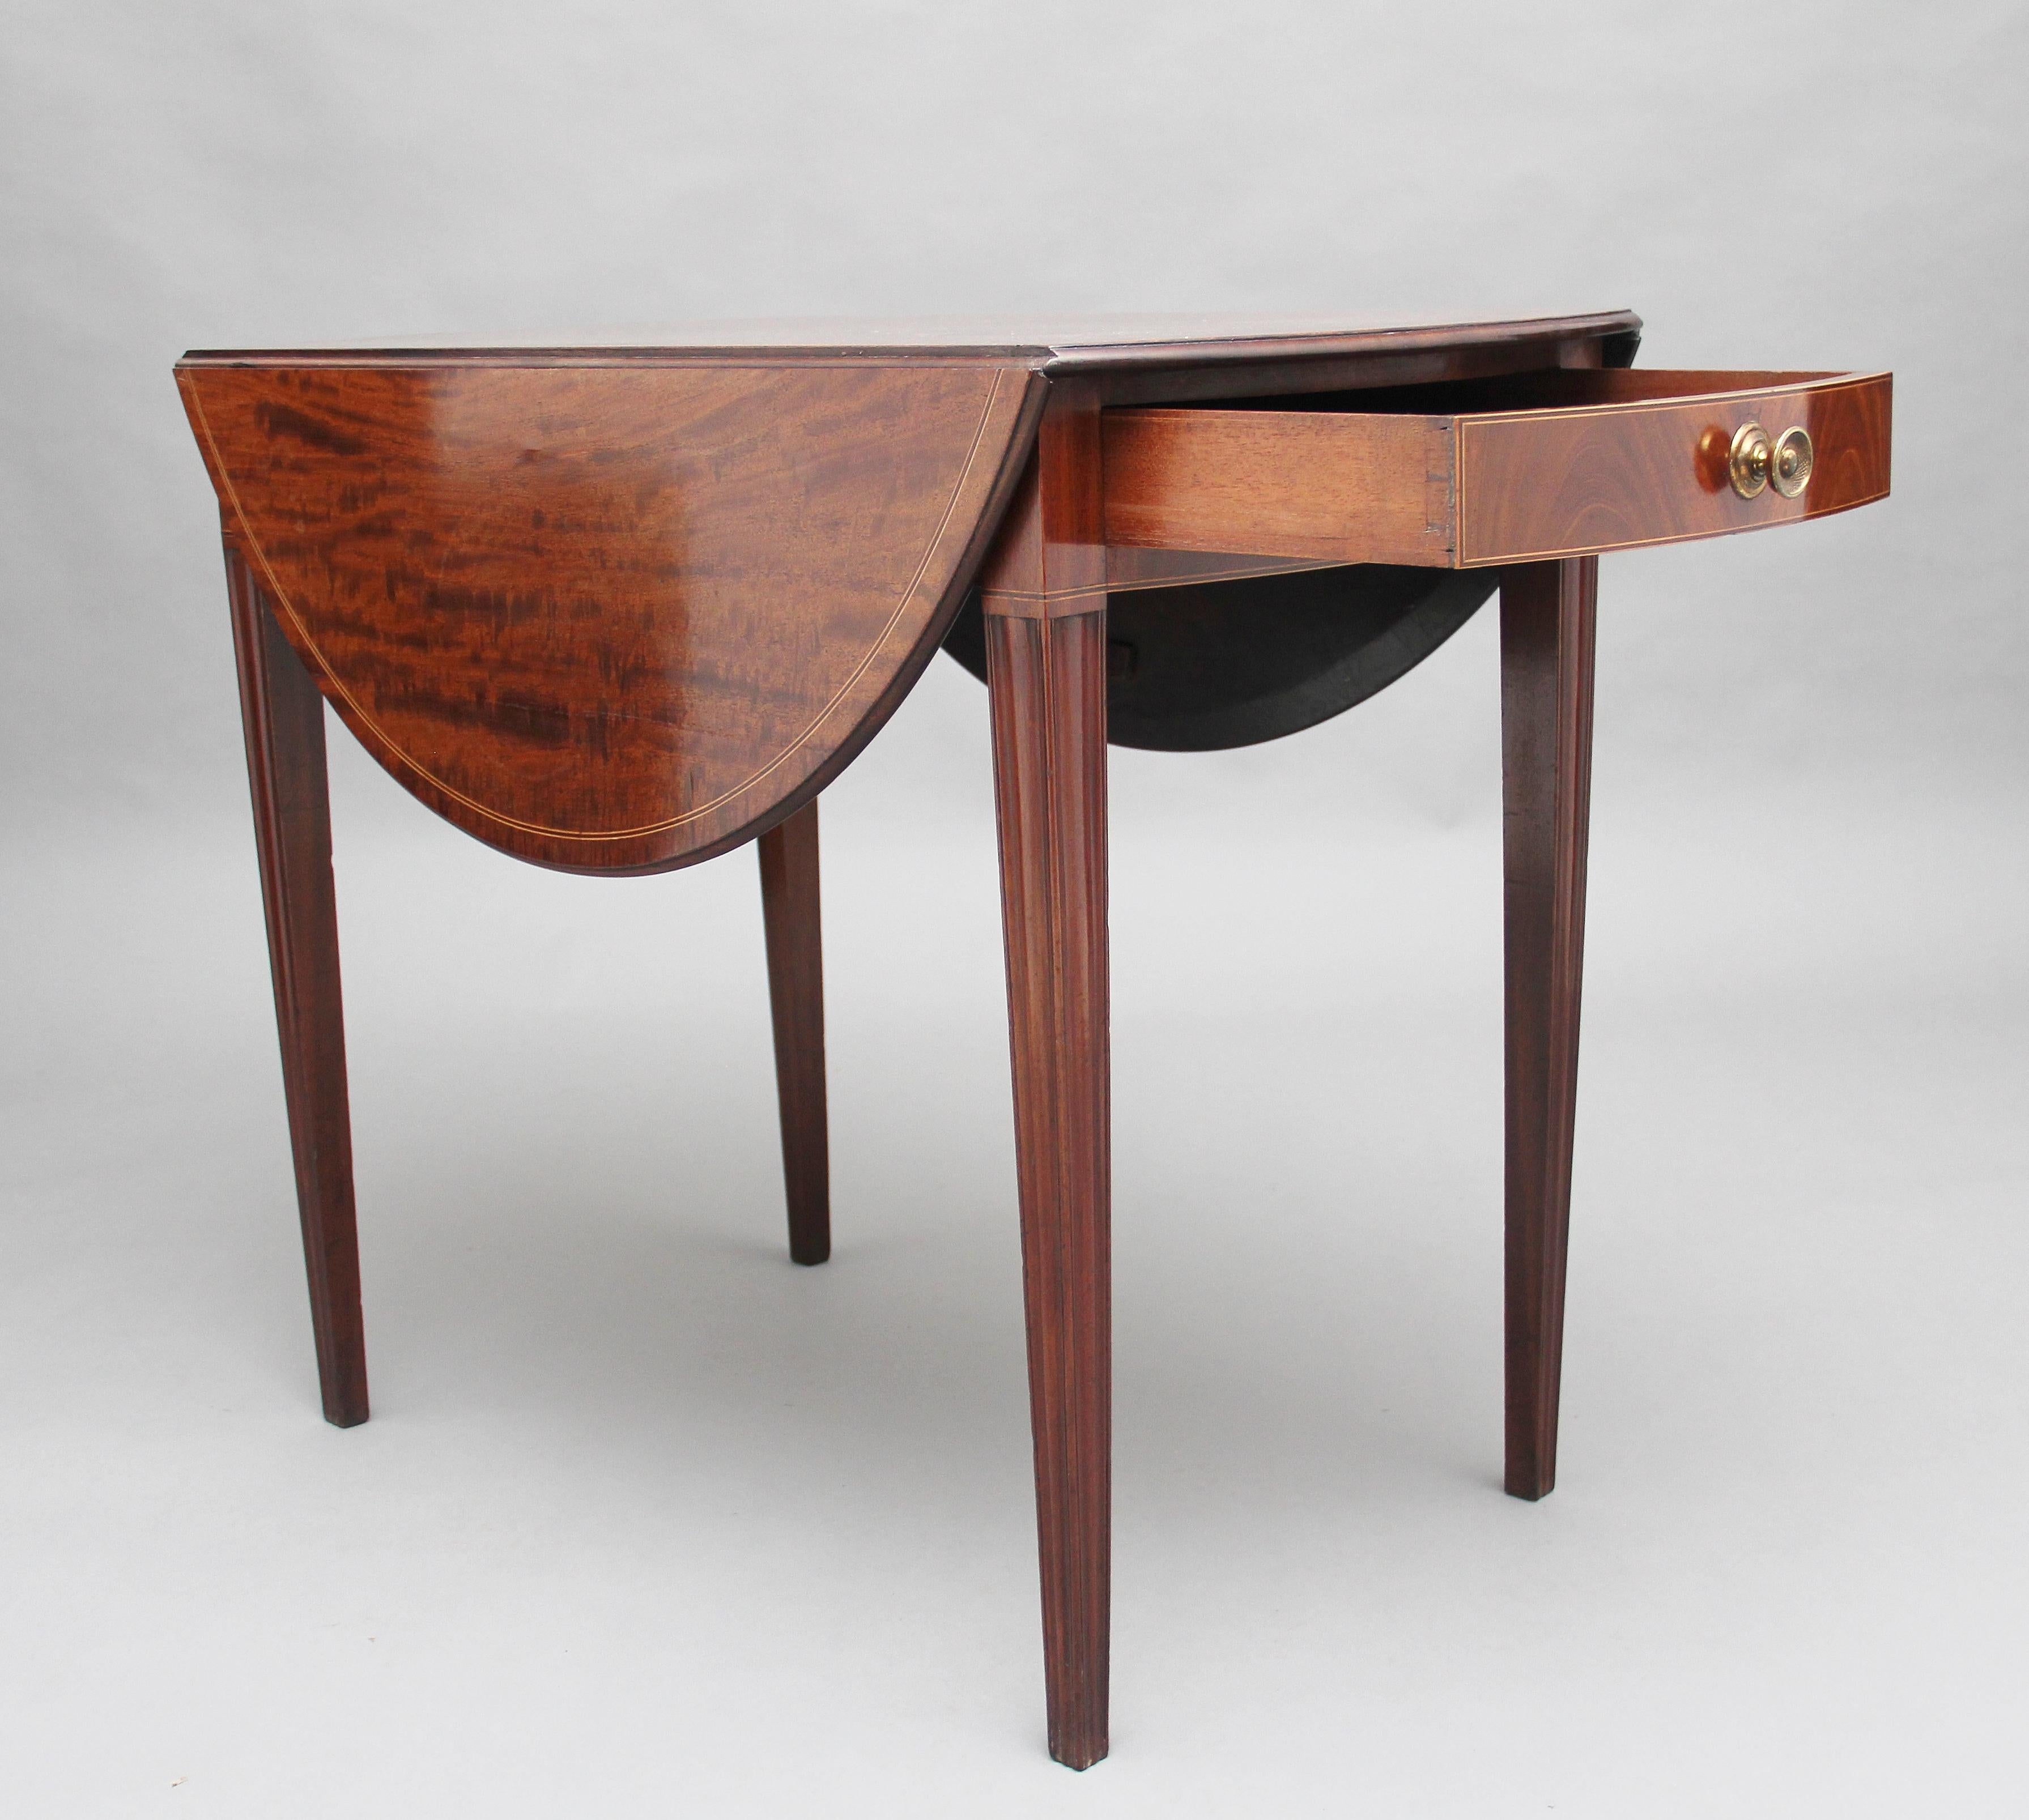 Early 19th century mahogany Pembroke table, the lovely figured drop leaf top with a moulded edge and inlay decoration, a single mahogany lined drawer at one end with a turned brass handle, the drawer front also having inlay decoration, supported on